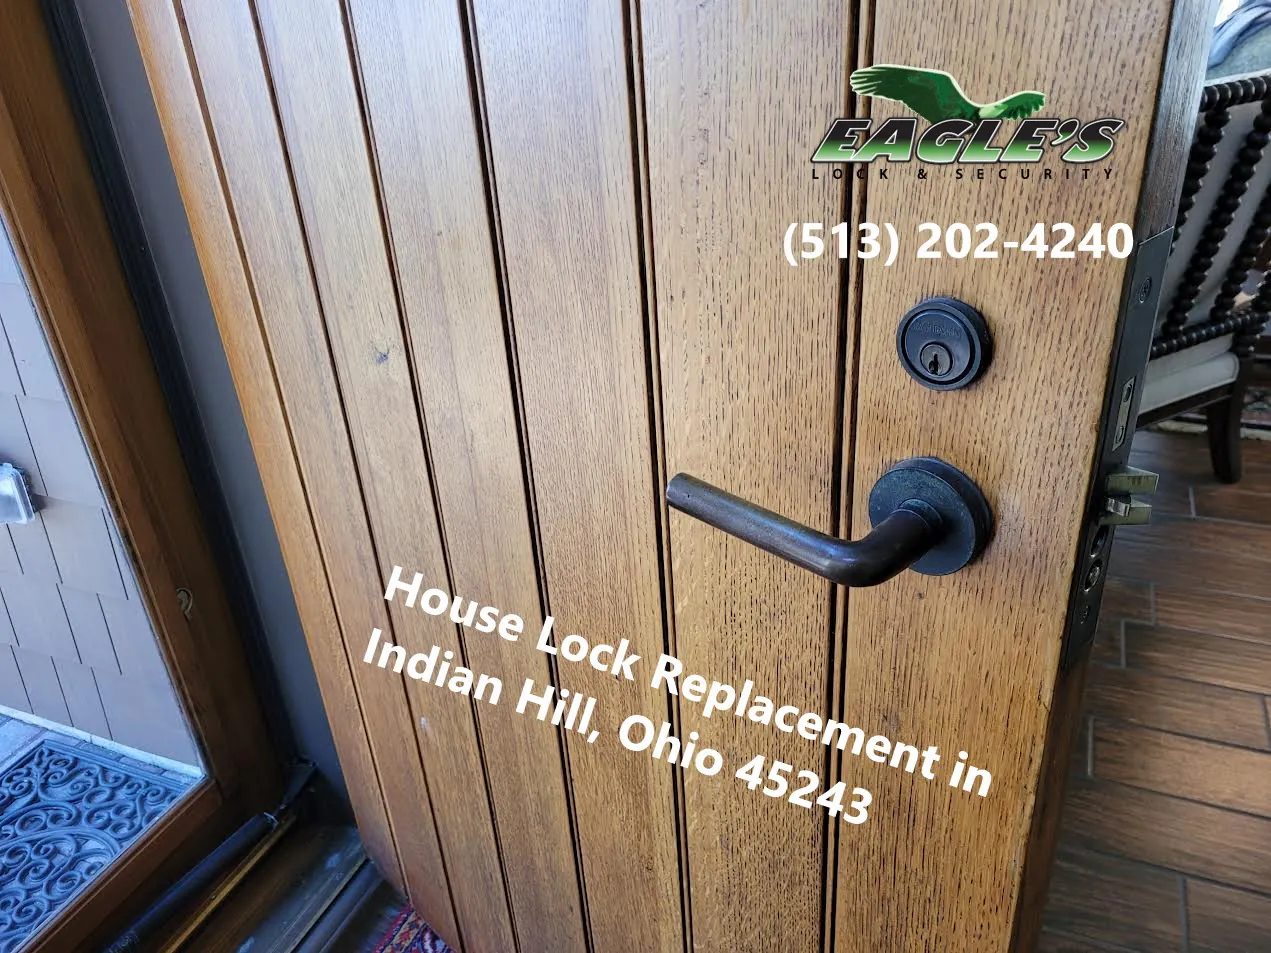 House Lock Replacement in Indian Hill, Ohio 45243